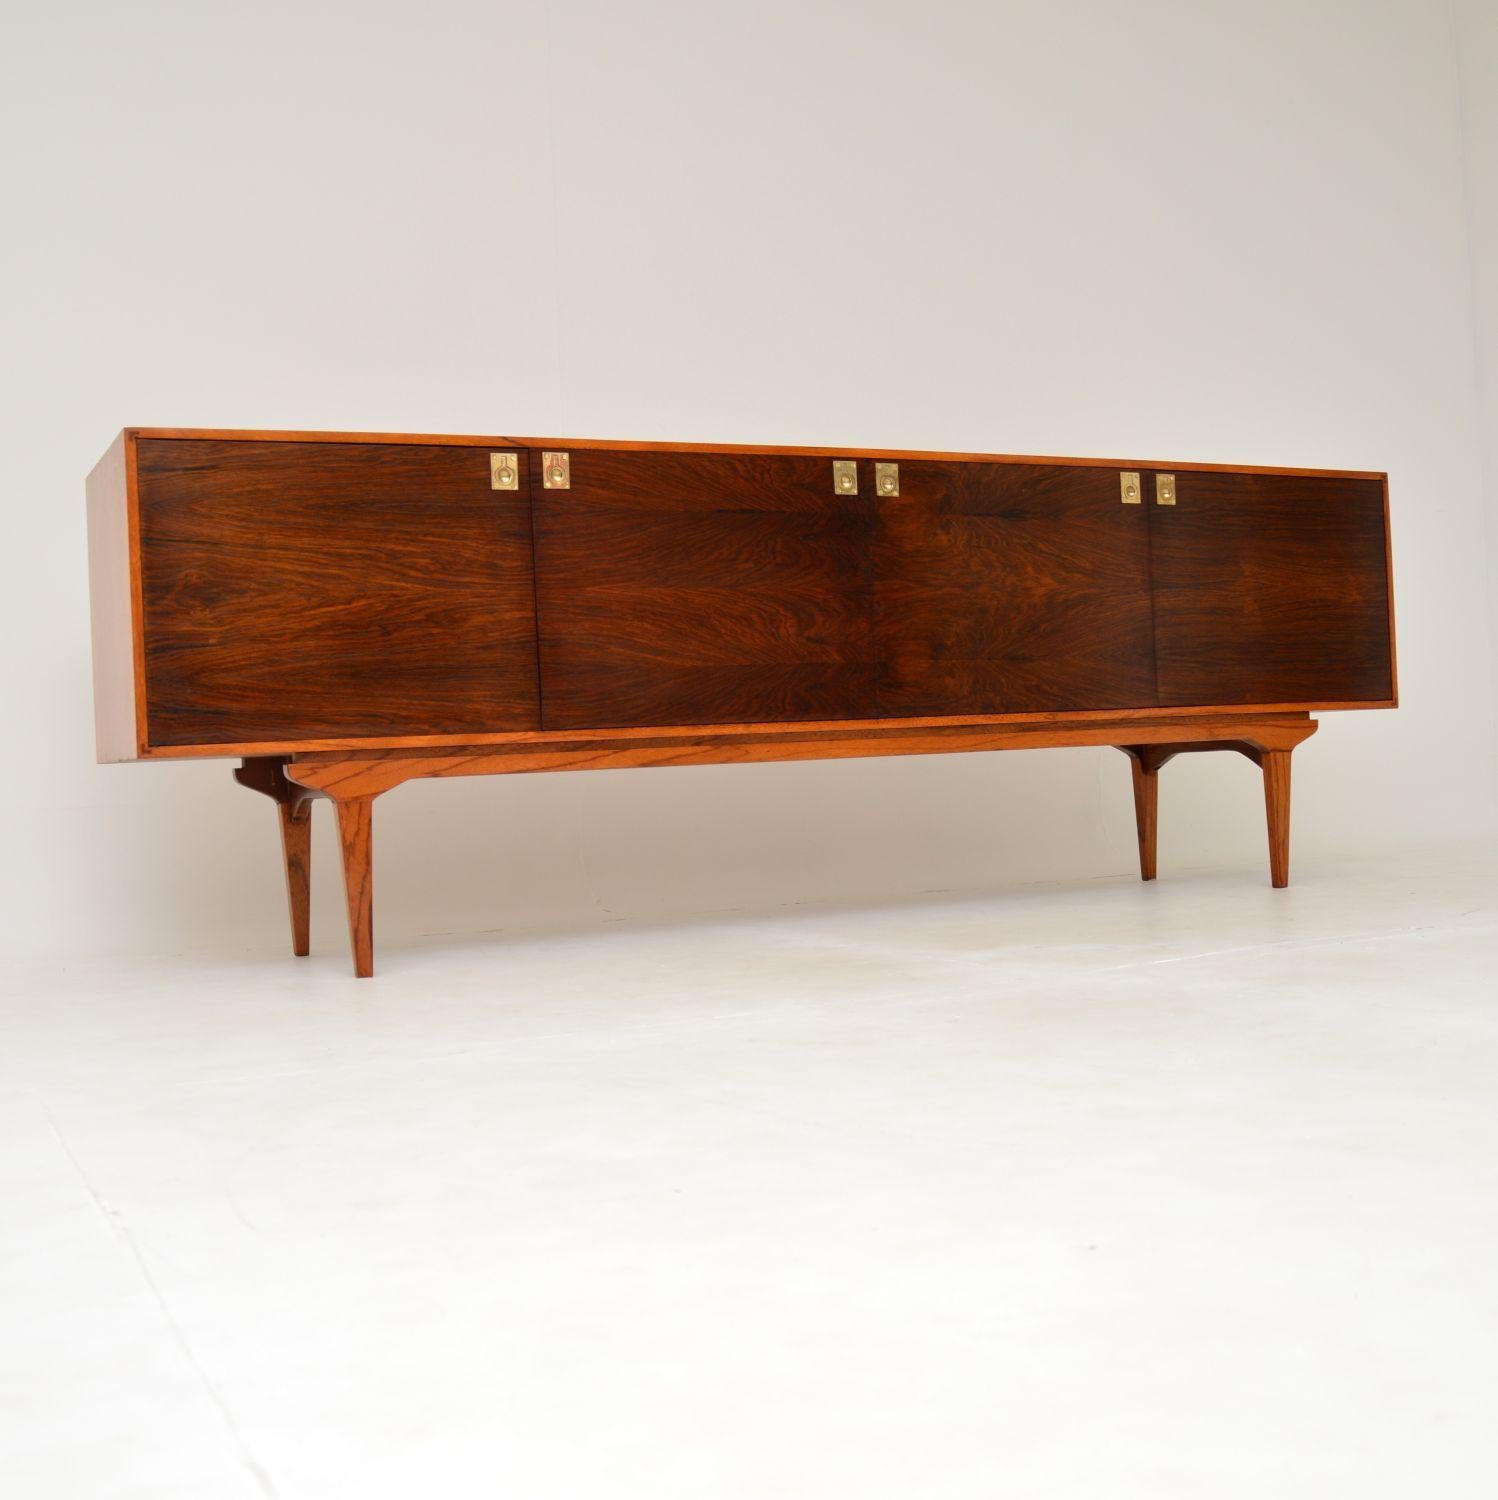 A stunning and extremely well made vintage sideboard. This was made in the UK by Everest furniture, it dates from the 1960’s.
These were originally retailed in Heal’s in the 1960’s, the quality and design is of the highest order. The front has a